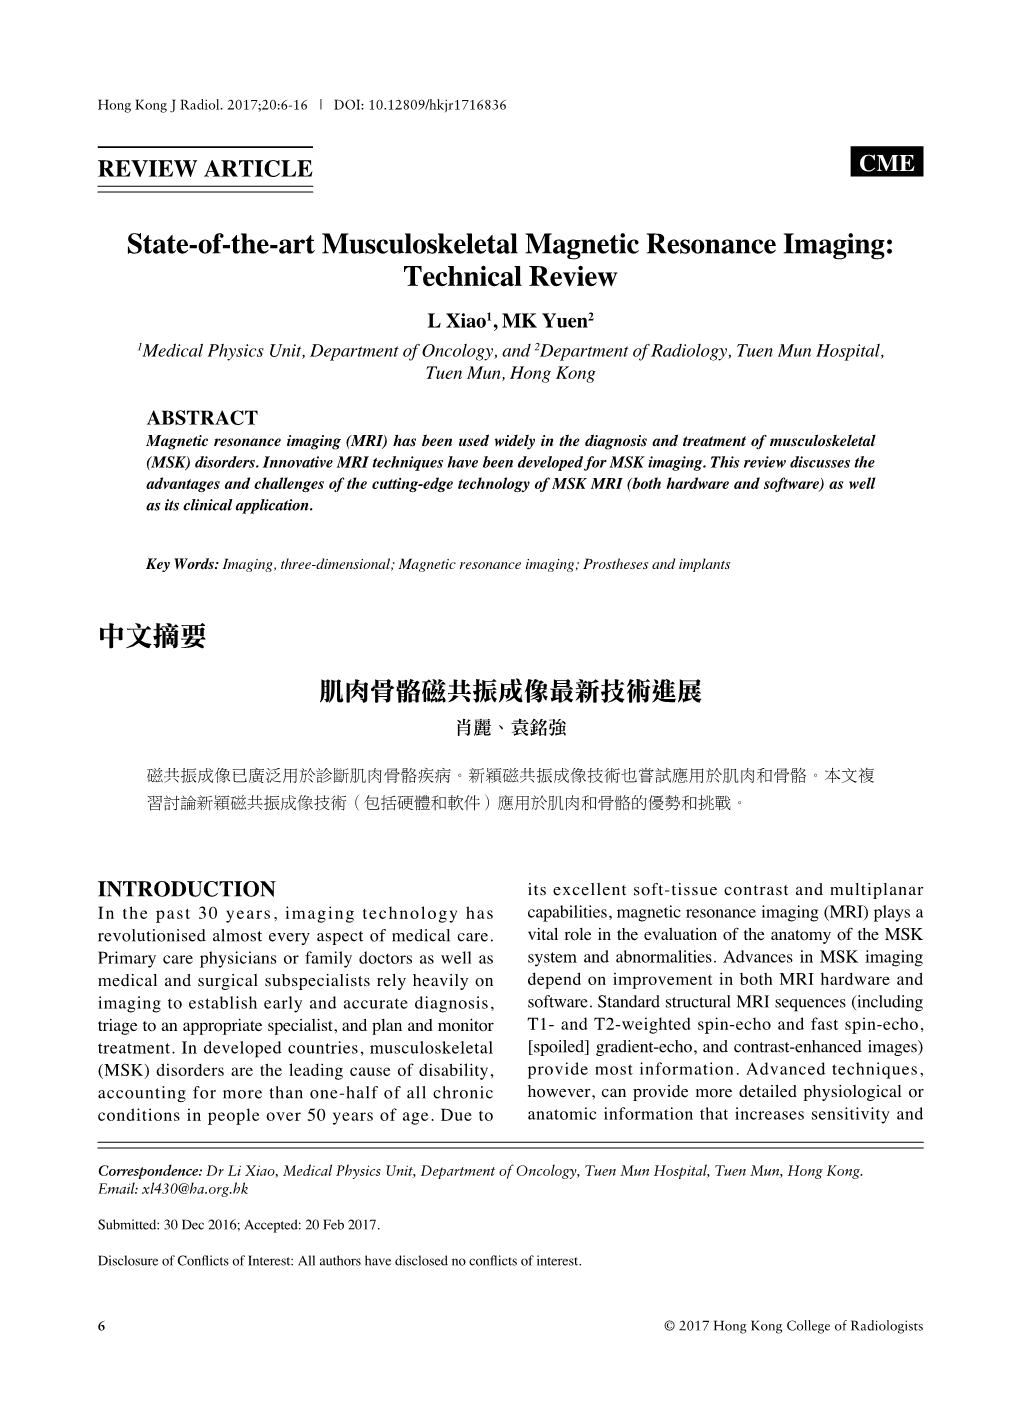 State-Of-The-Art Musculoskeletal Magnetic Resonance Imaging